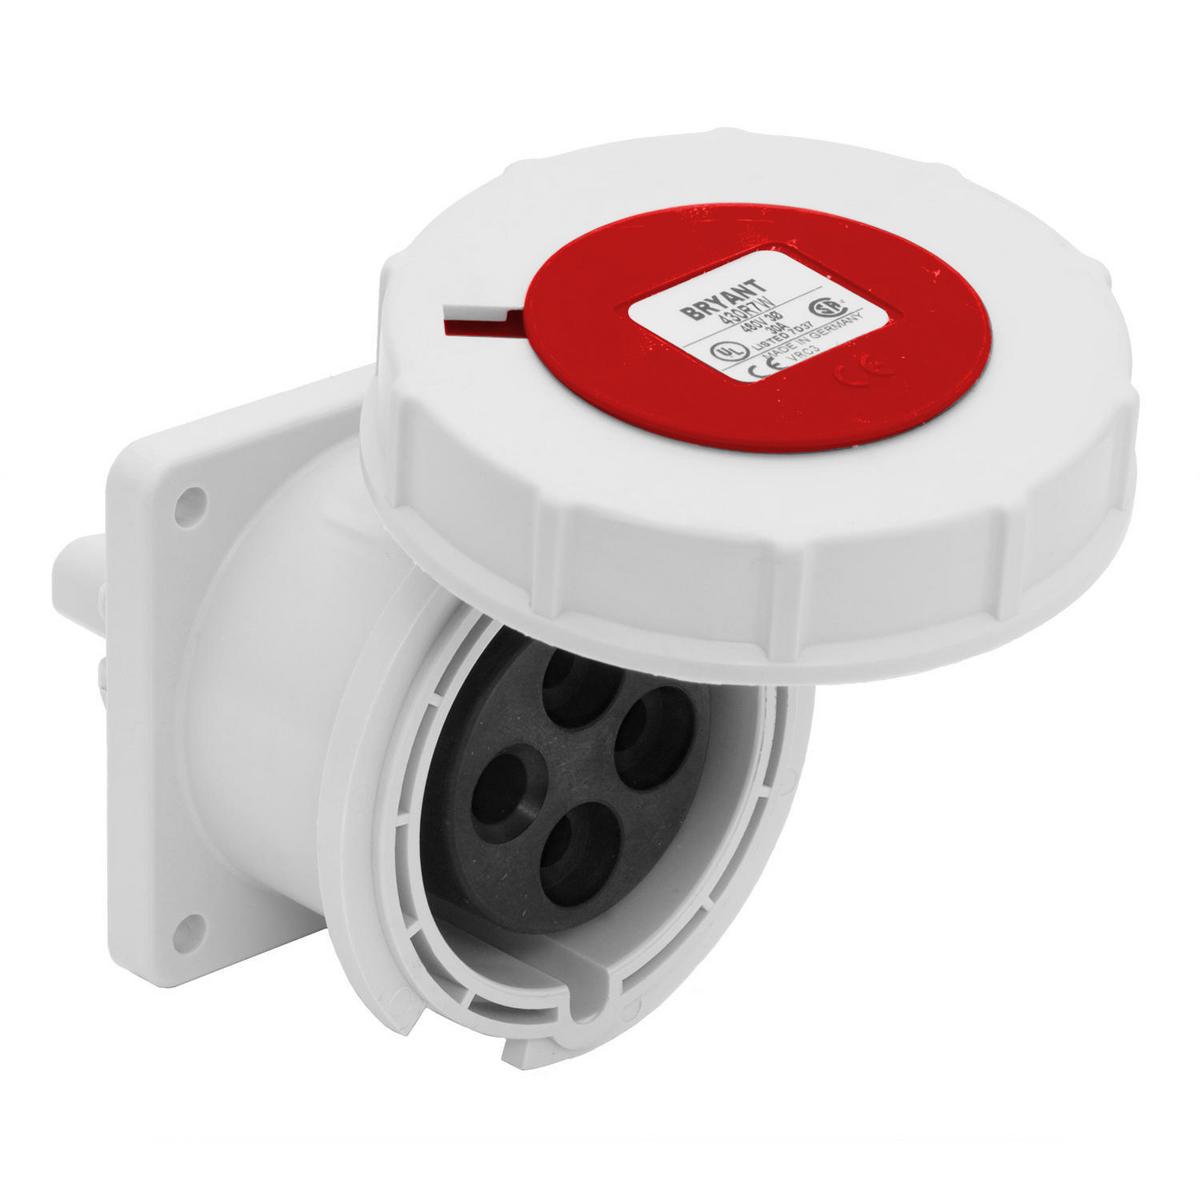 Hubbell 430R7W Heavy Duty Products, IEC Pin and Sleeve Devices, Industrial Grade, Female Receptacle, 30A 3-Phase Delta 480V AC, 3-Pole 4-Wire Grounding, Screw Terminals, Red, Watertight  ; Watertight